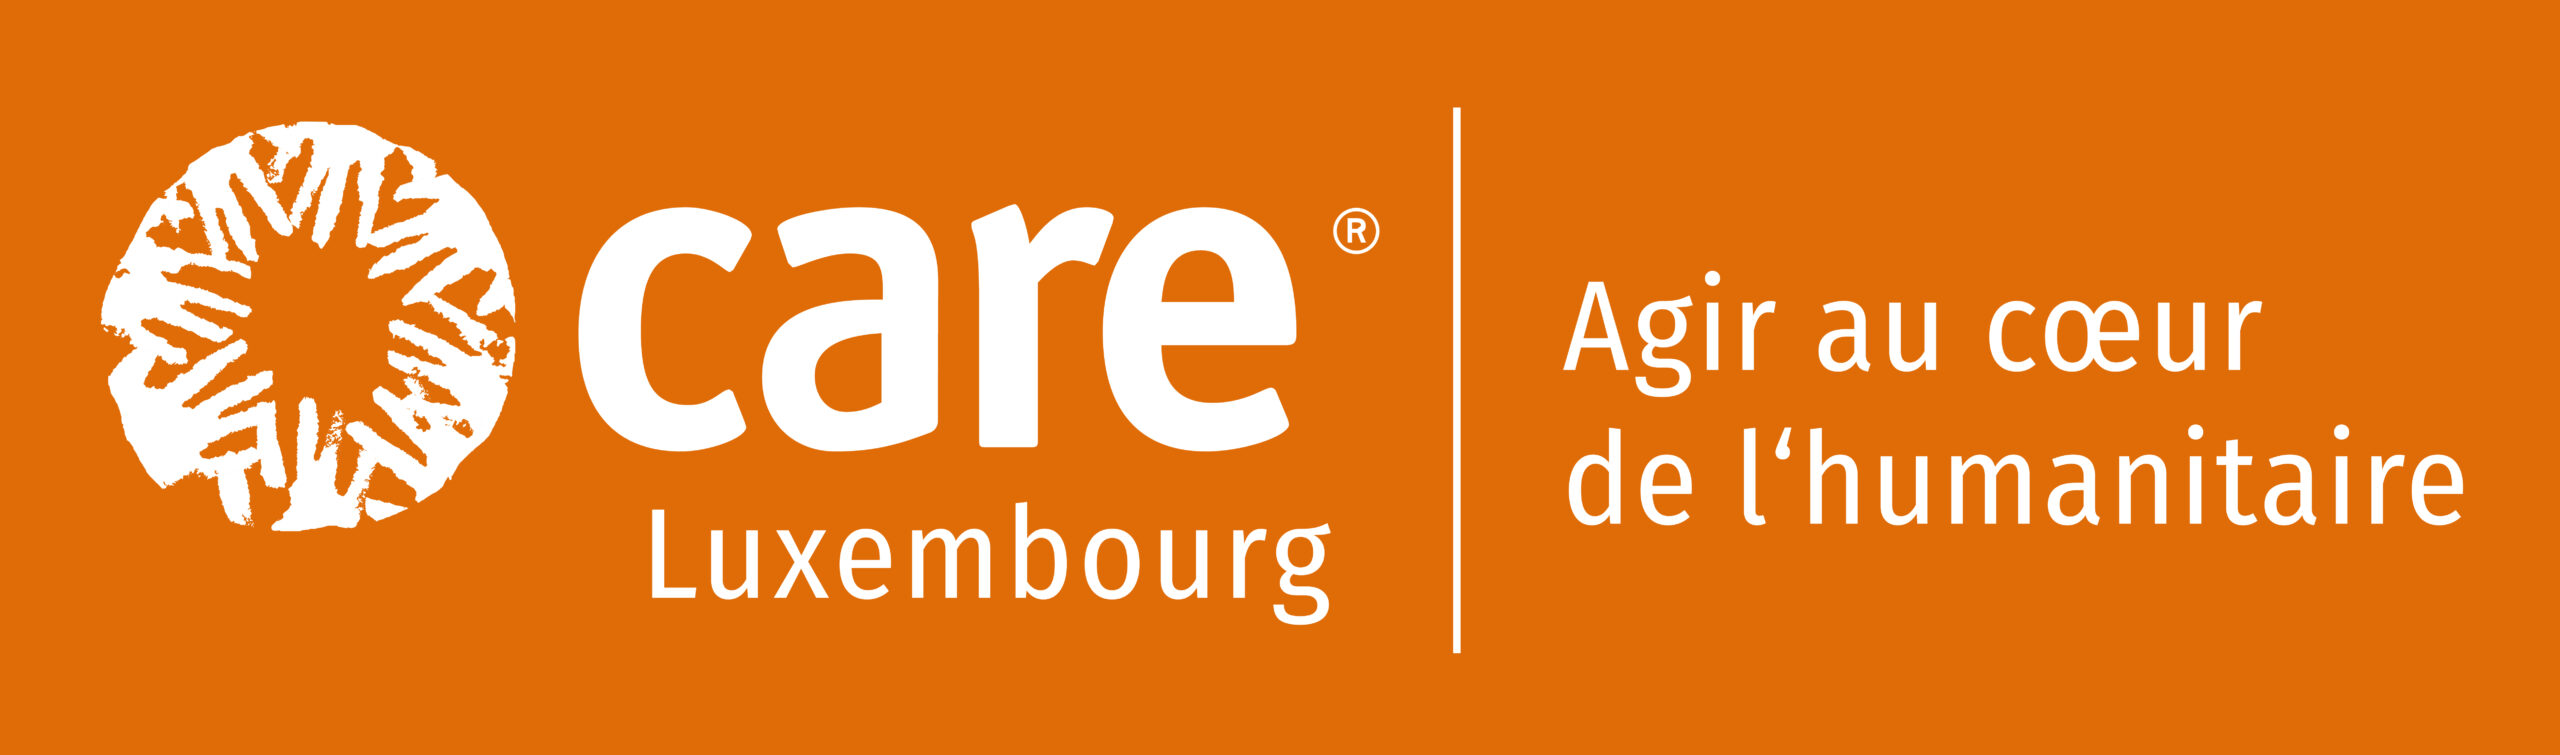 CARE in Luxembourg asbl